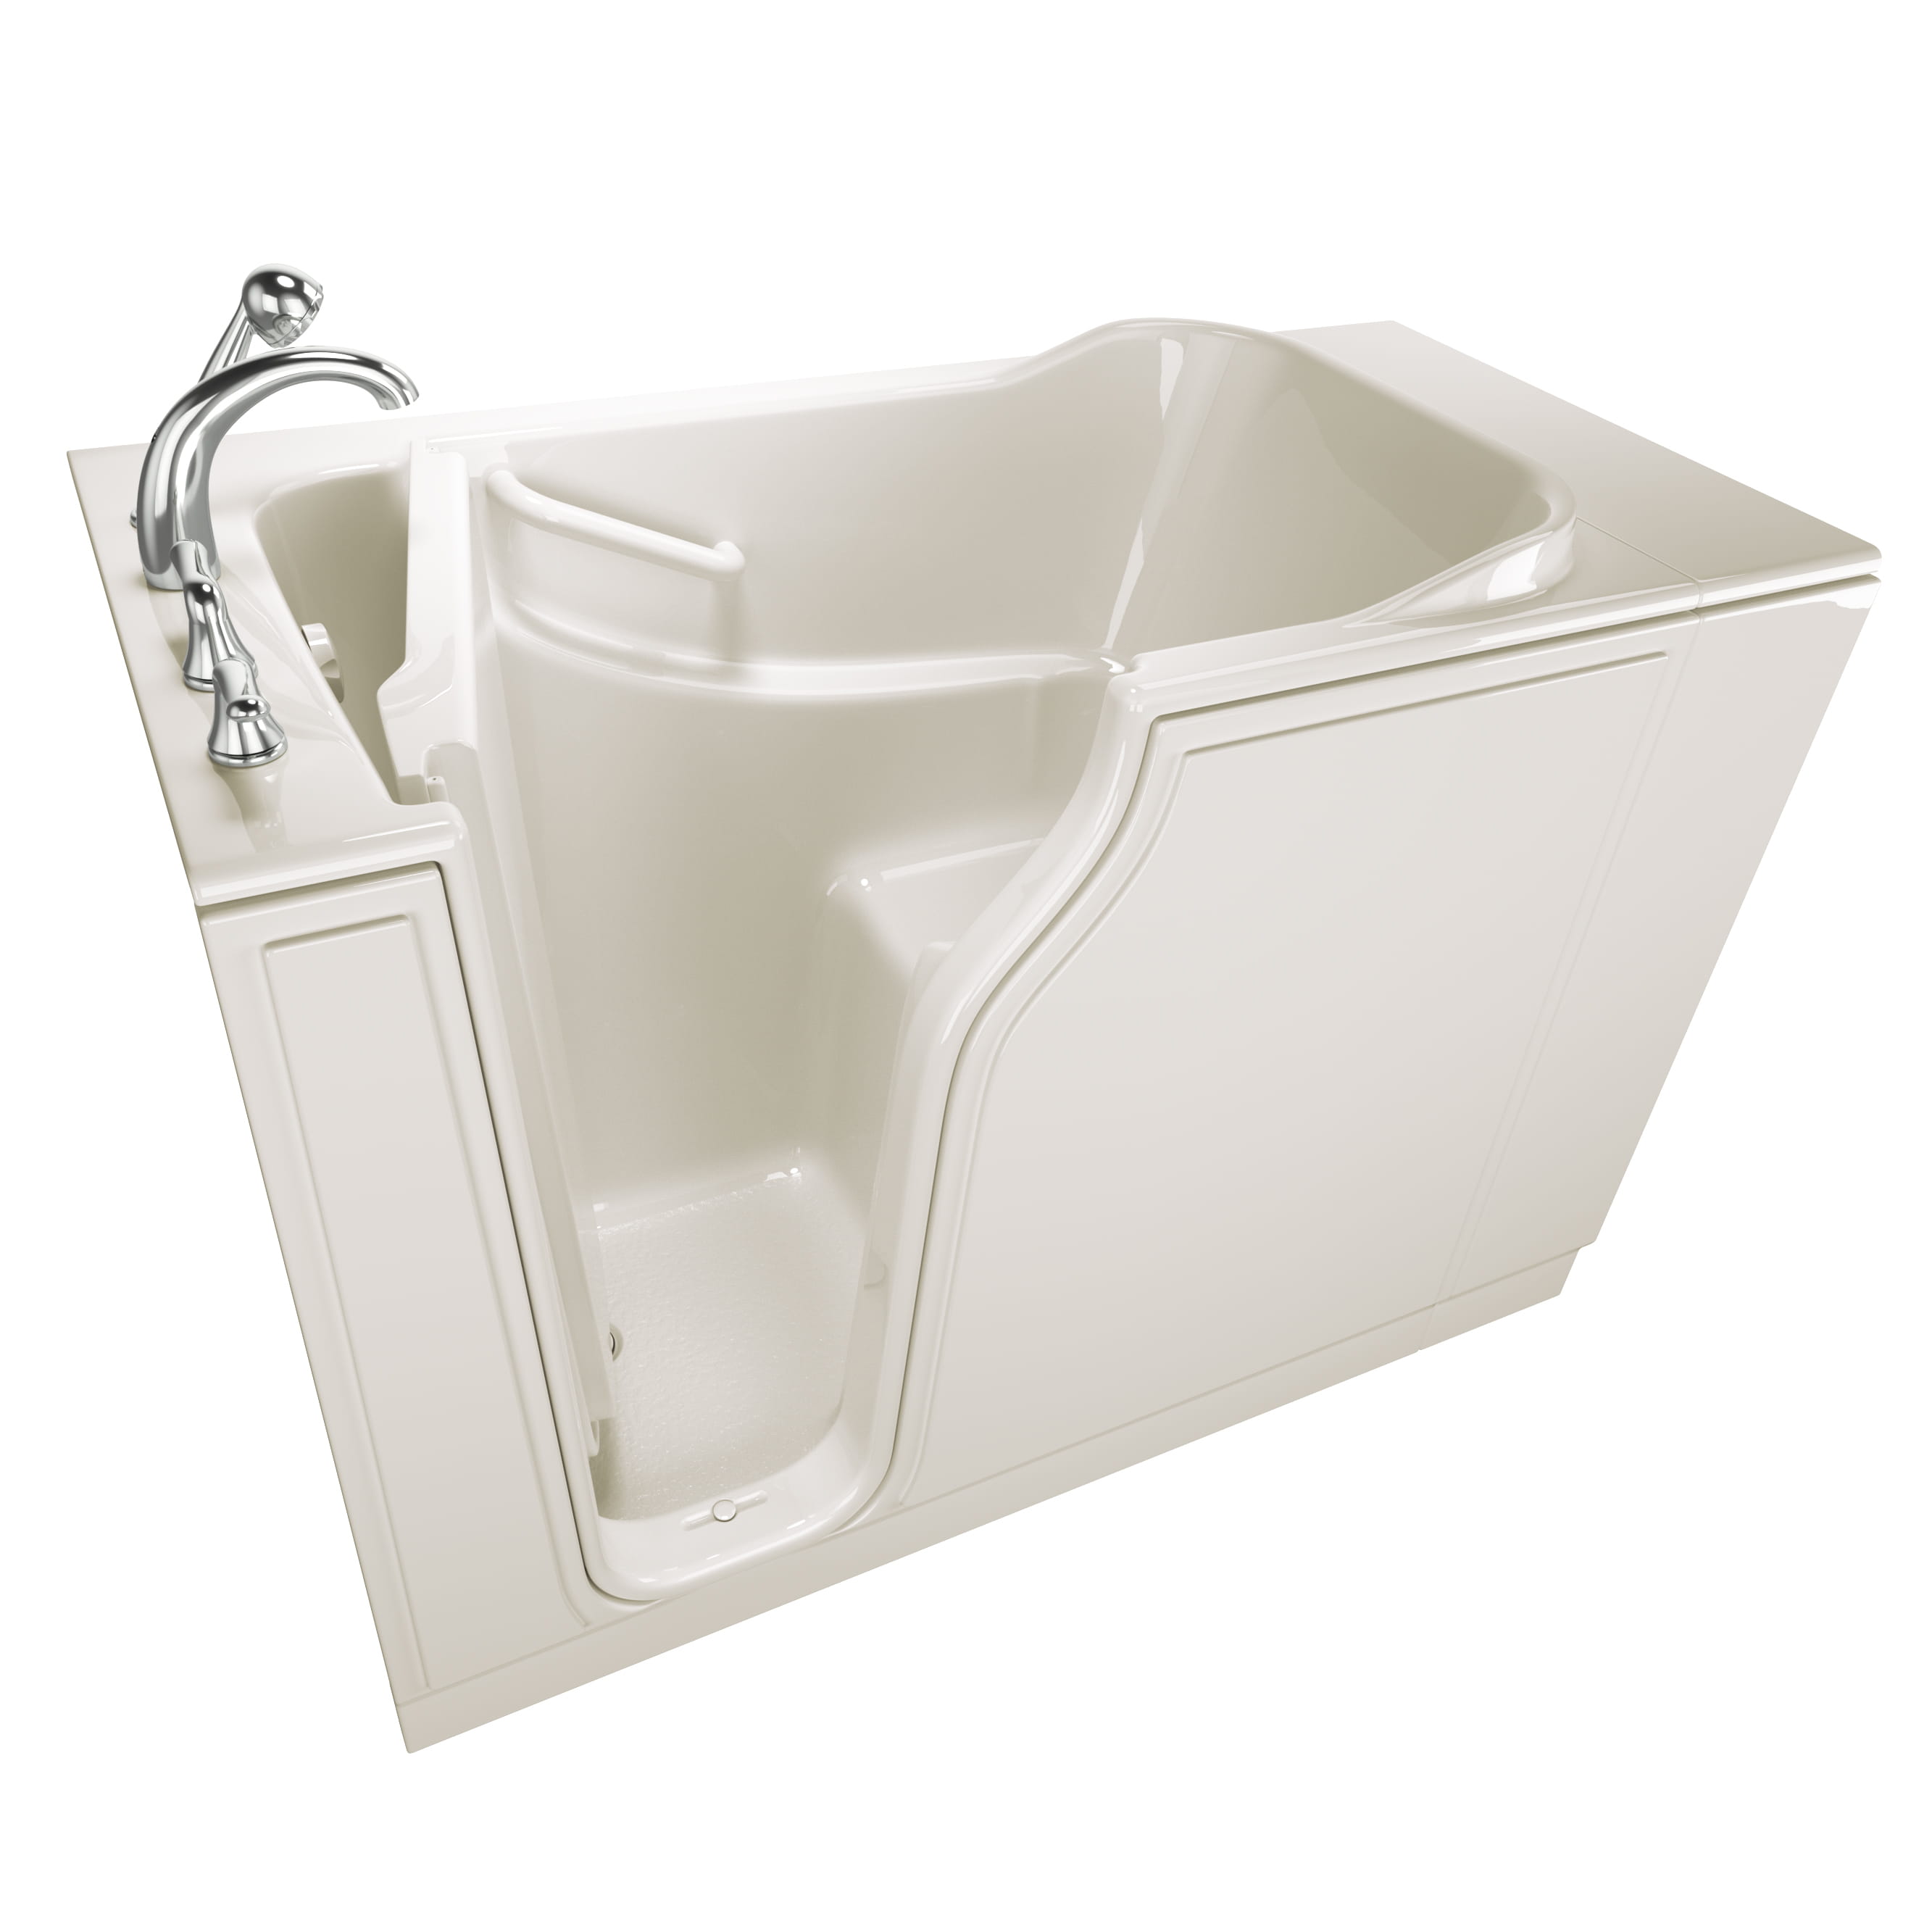 Gelcoat Entry Series 52 x 30-Inch Walk-In Tub With Soaker System – Left-Hand Drain With Faucet